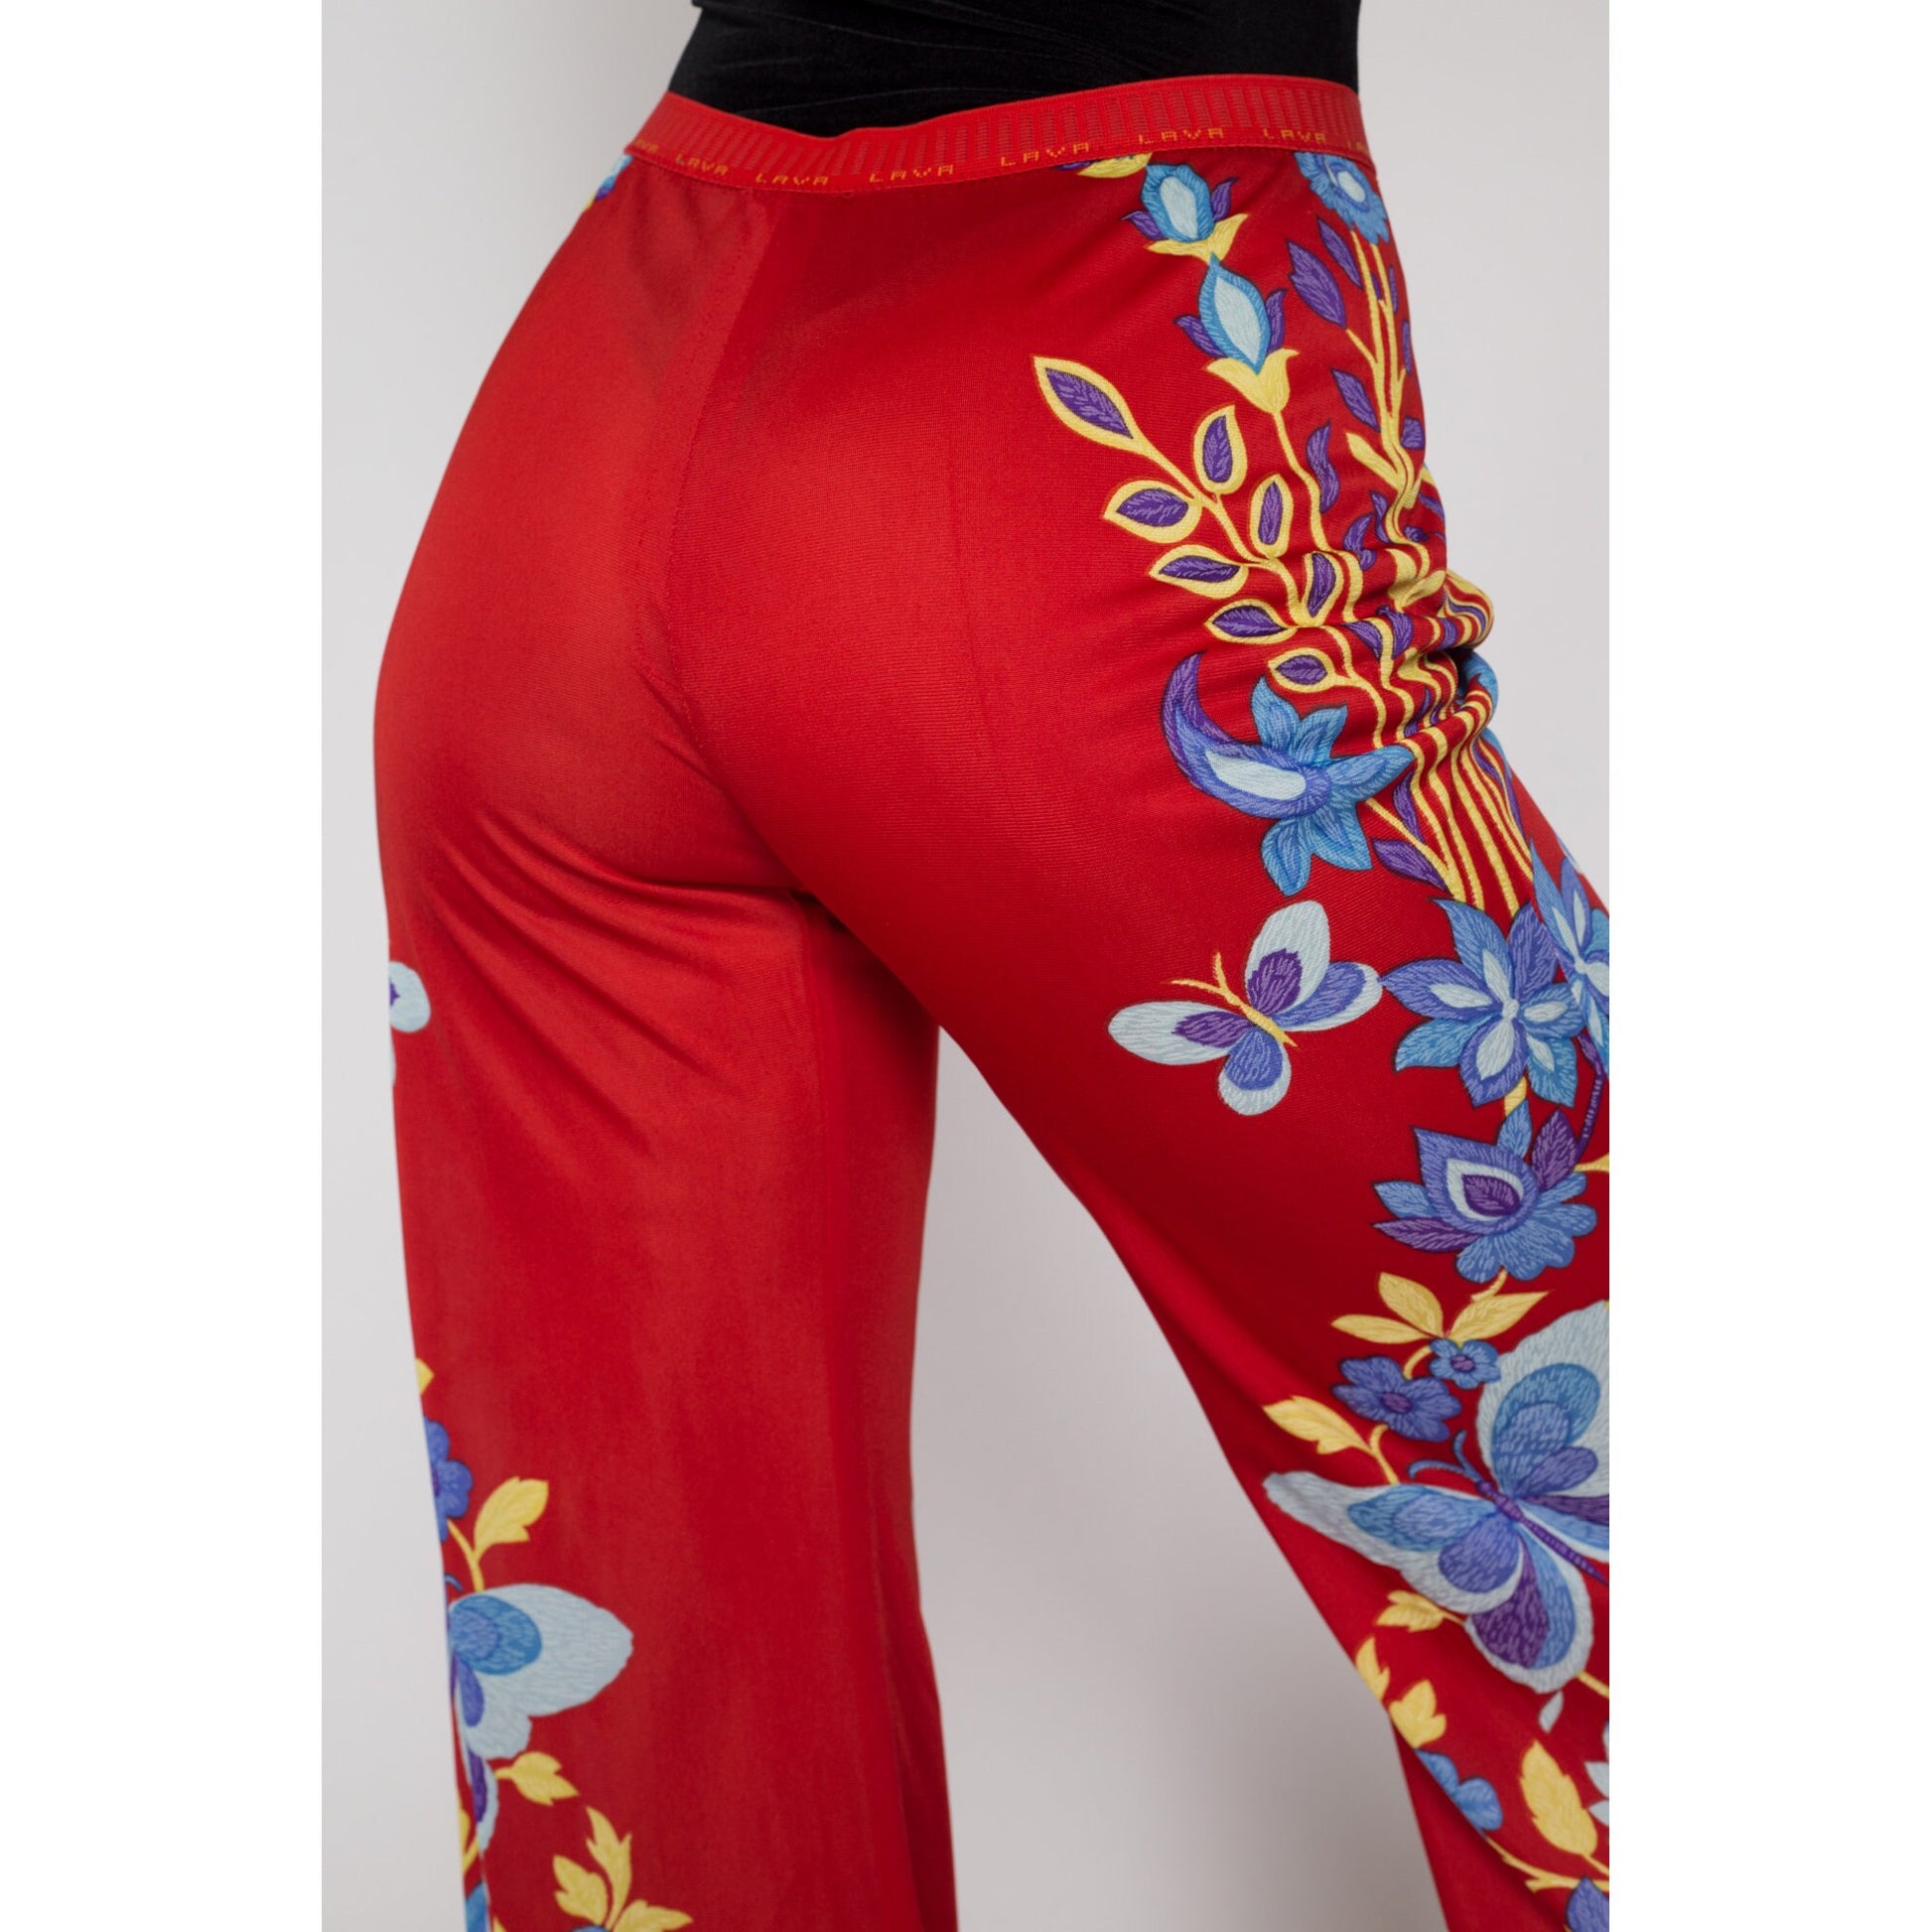 Medium 70s Red Floral & Butterfly Print Lounge Pants | Vintage High Waisted Boho Elastic Polyester Flared Trousers